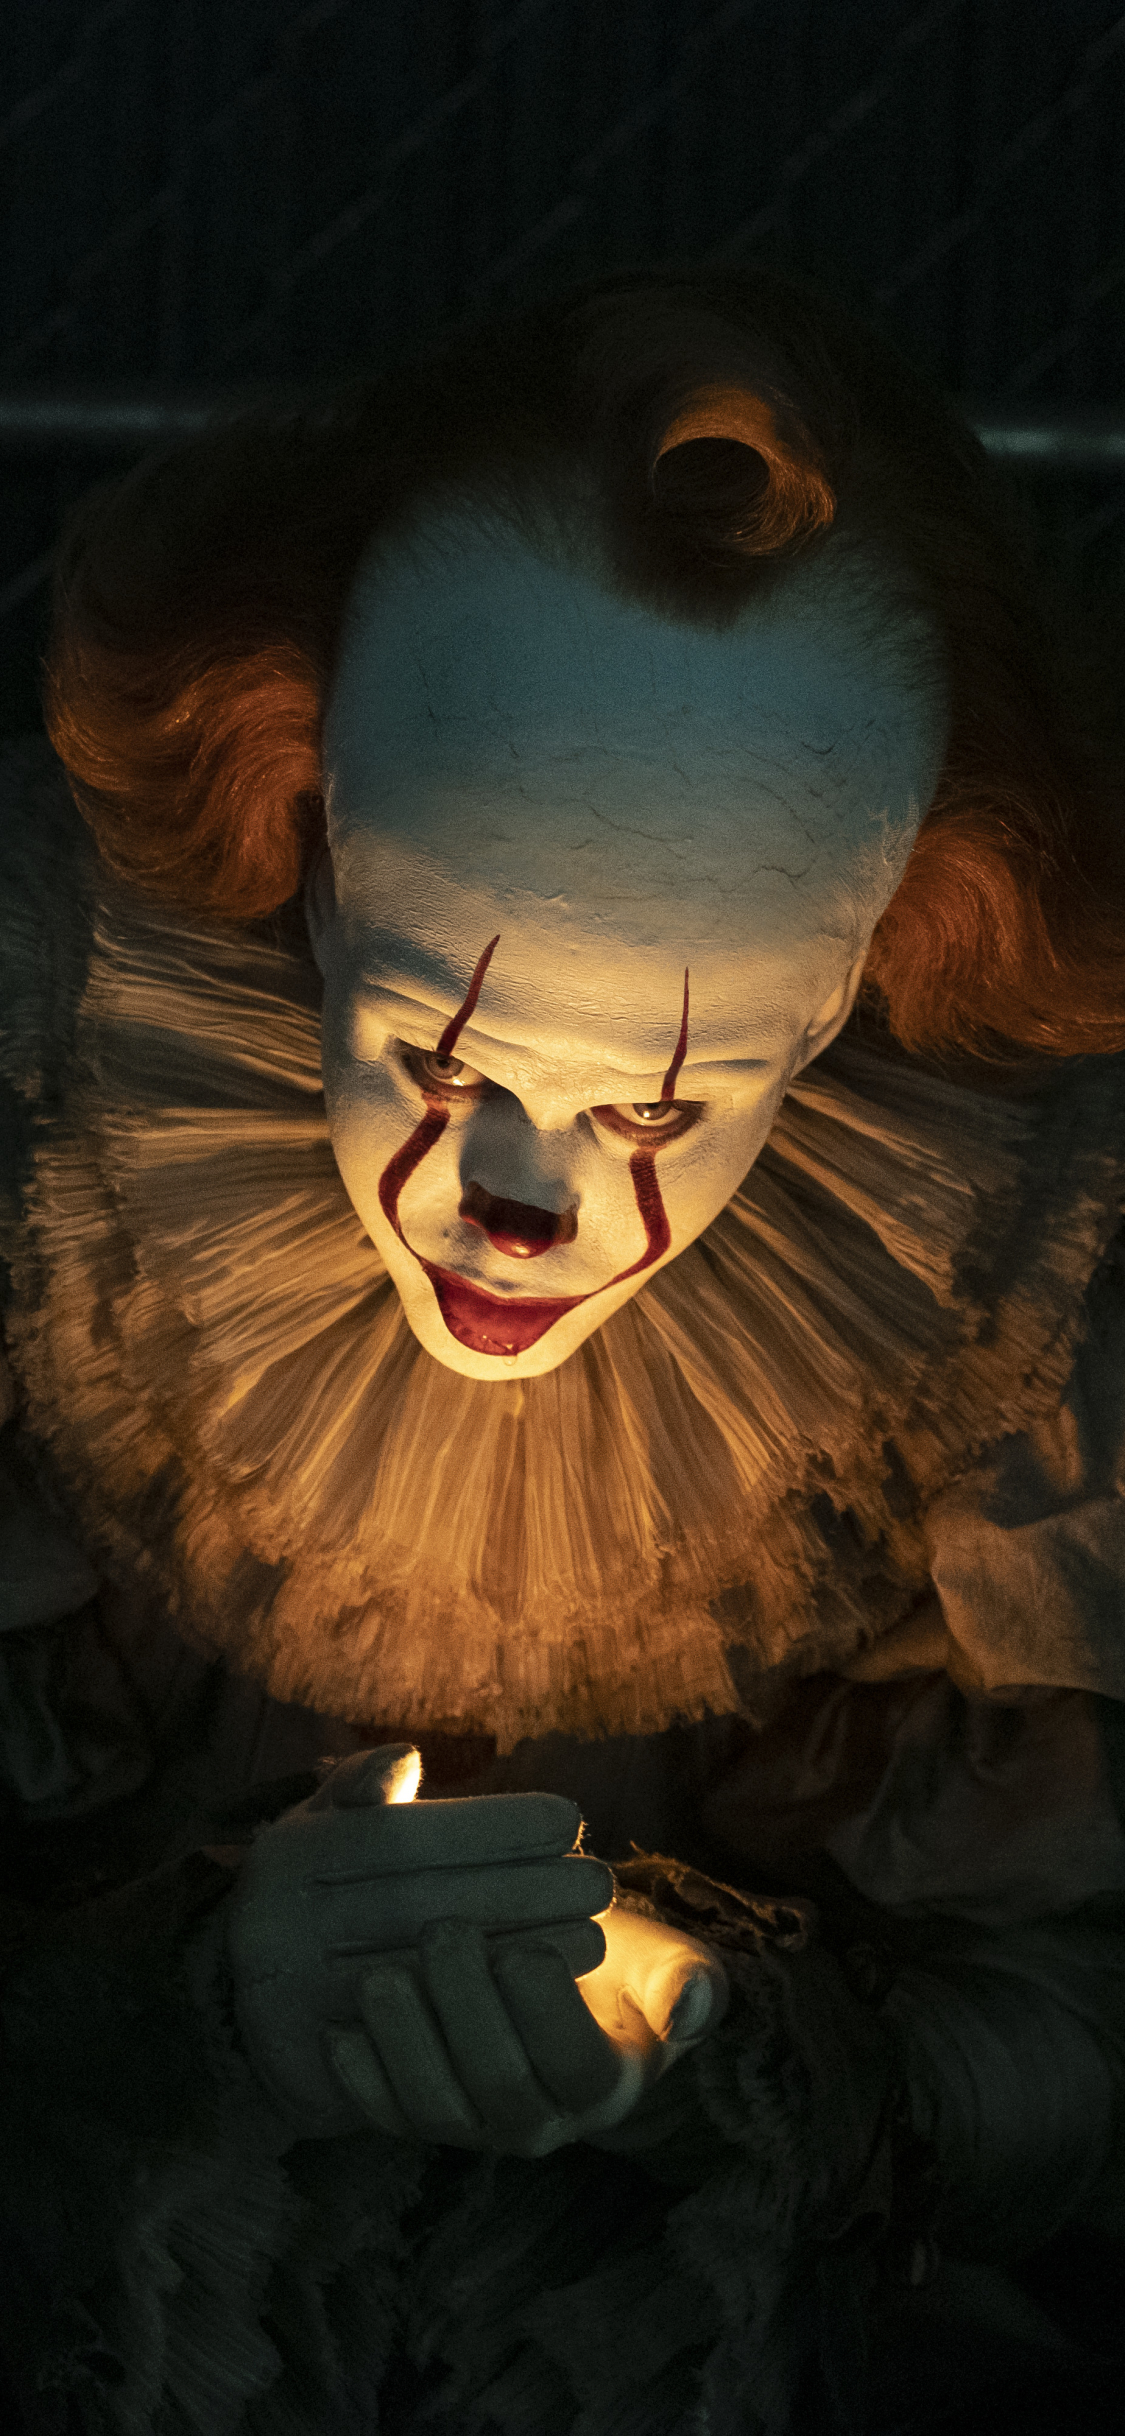 pennywise (it), movie, it chapter two